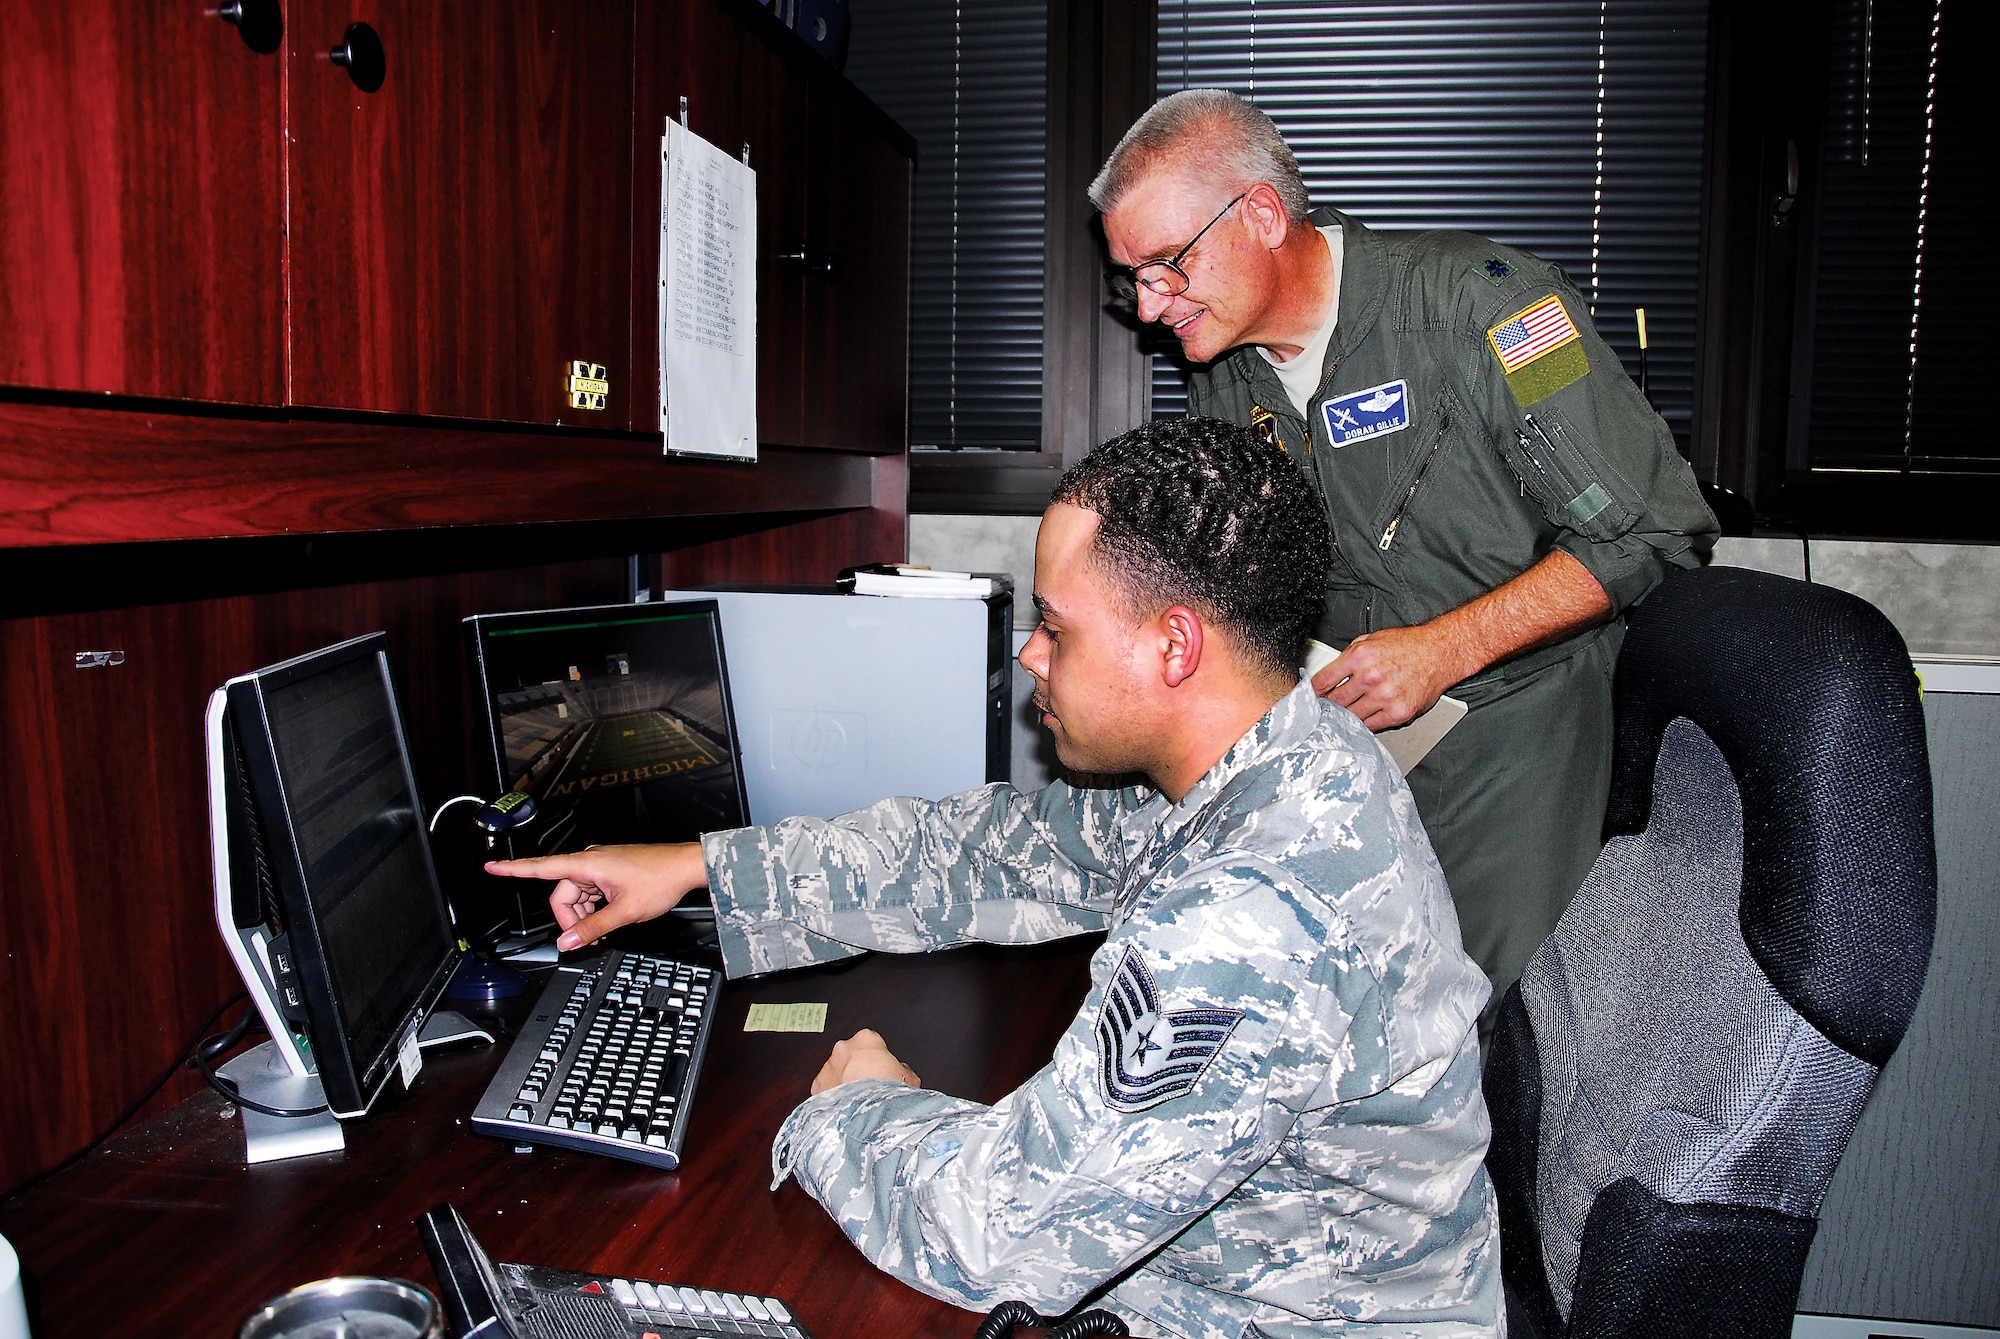 Tech. Sgt. Dwayne Curtis of LRS goes over his inspection checklist with Lt. Col. Doran Gillie, new chief of the Exercise Evaluation Team. (Air Force photo by Gene H. Hughes)